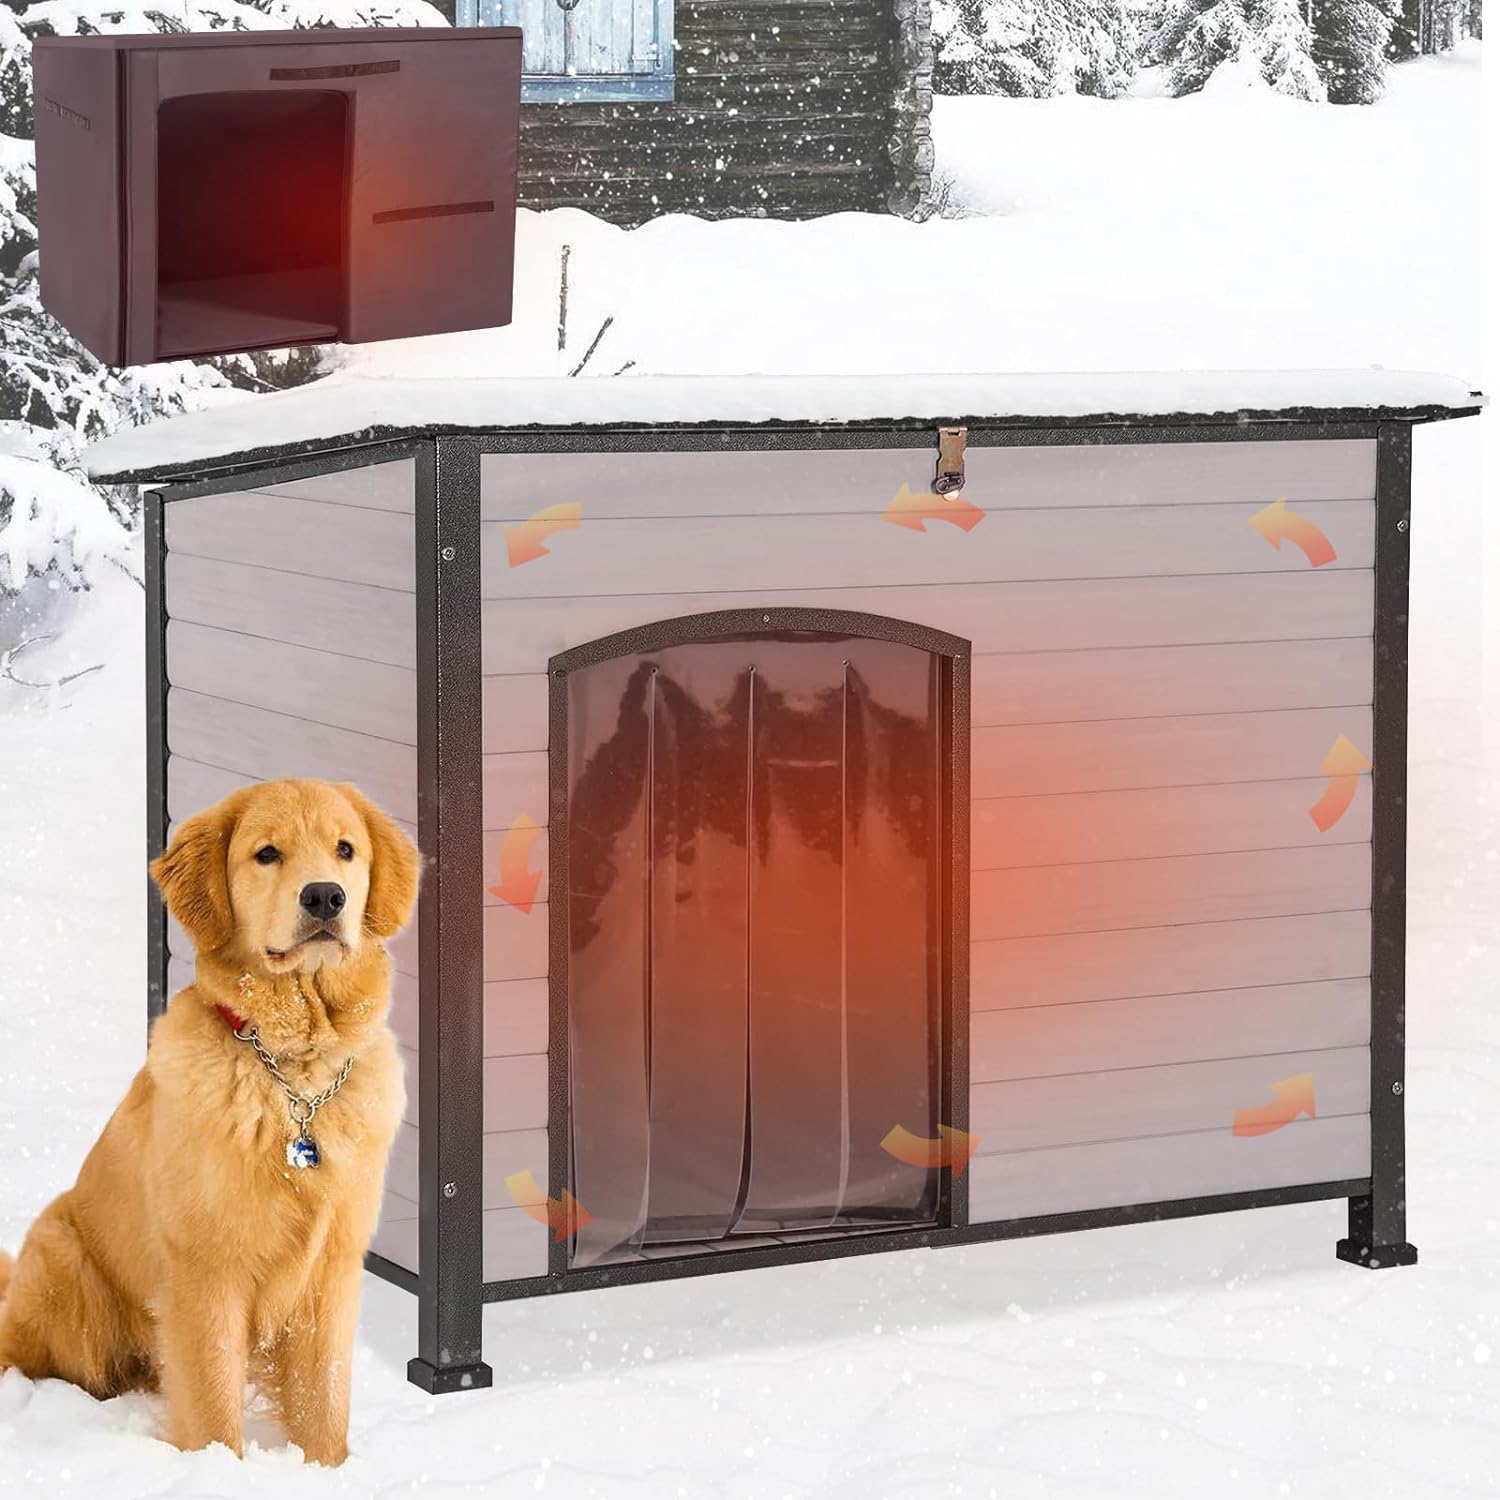 Insulation Dog House Outdoor Dog Kennle with Liner for Winter